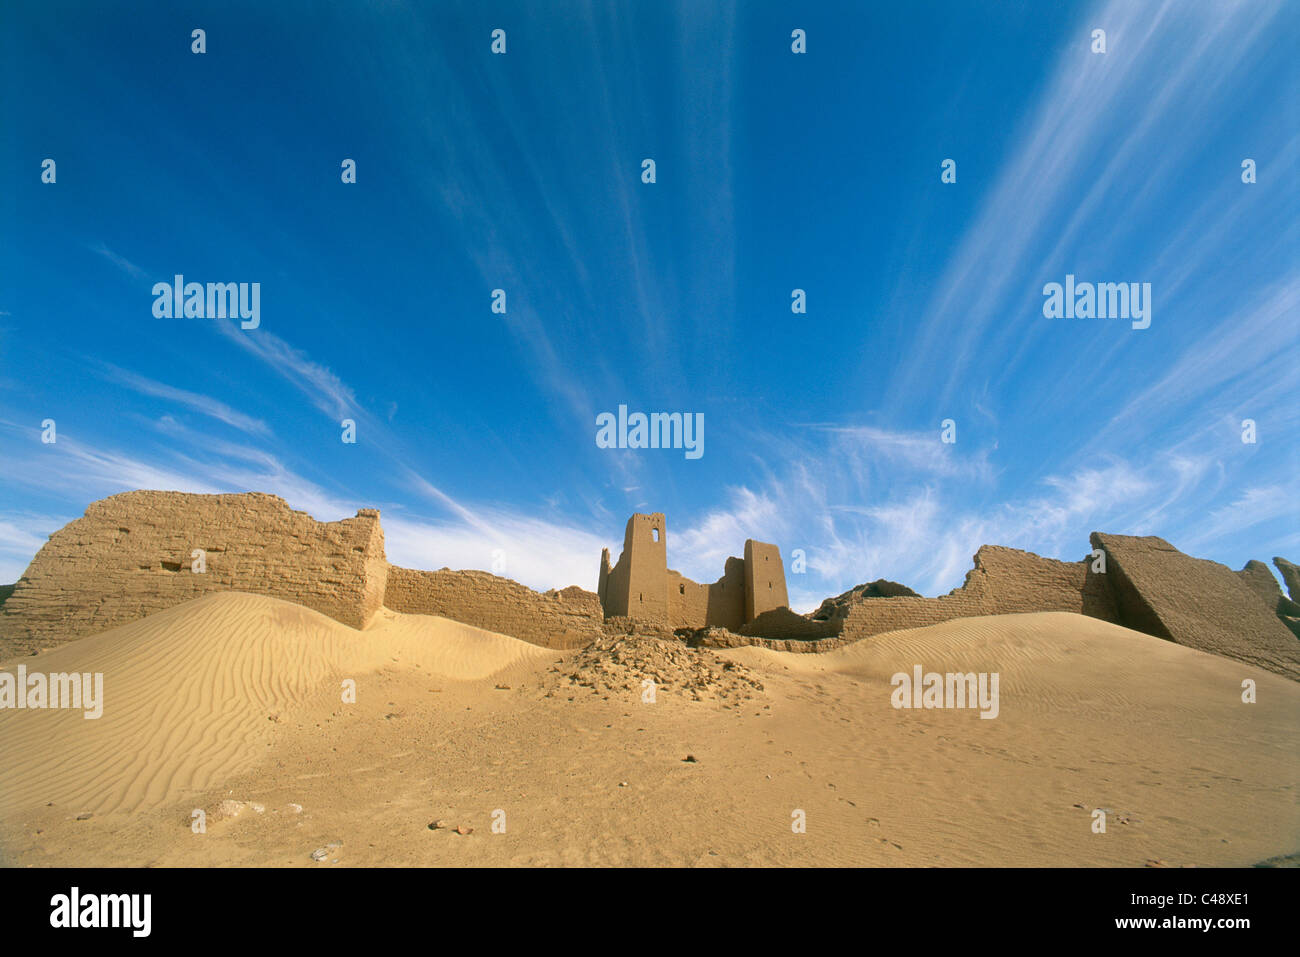 Photograph of the ruins of a castle in the western desert of Egypt Stock Photo